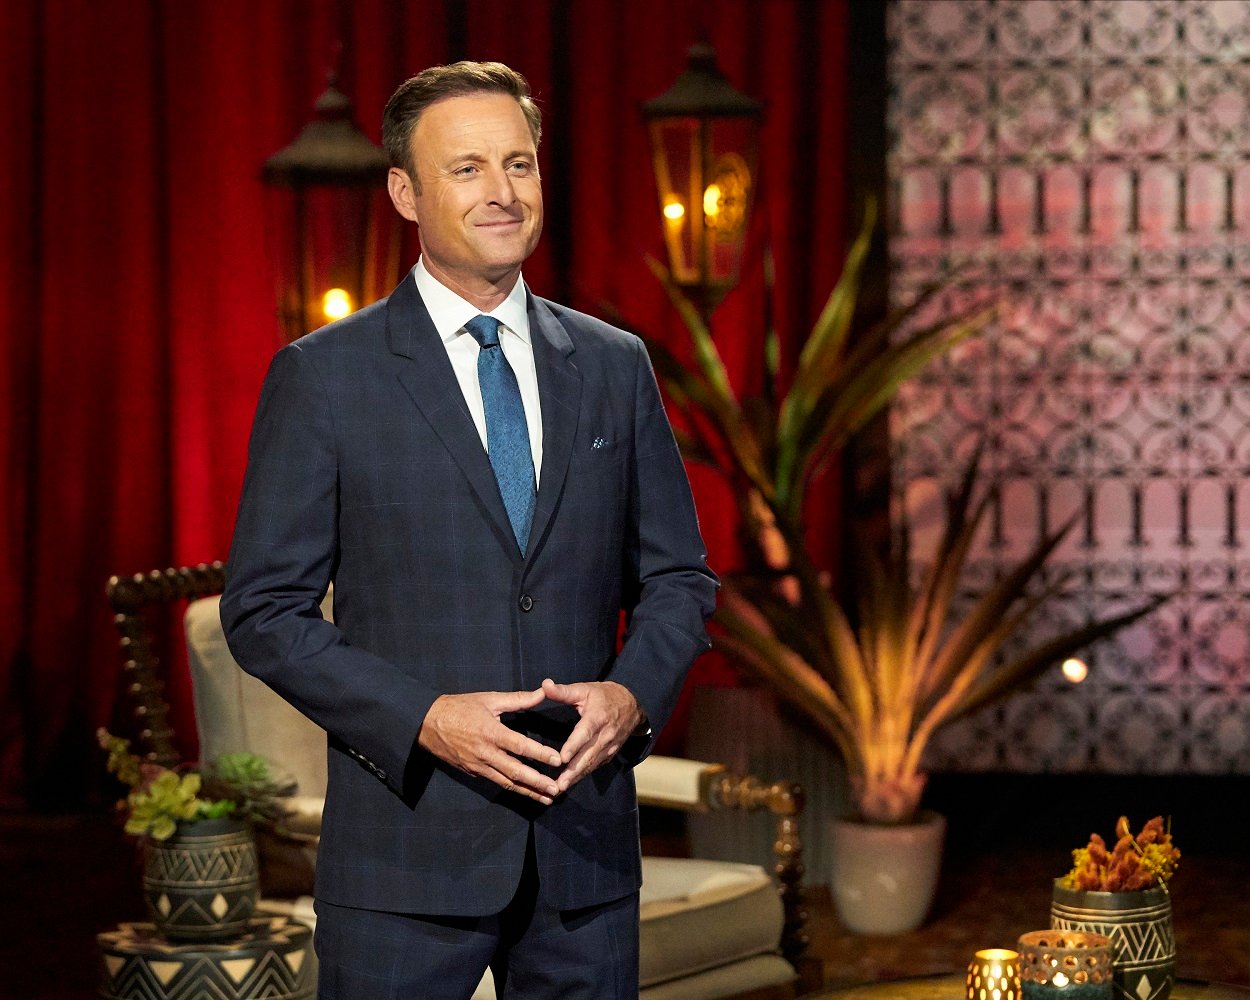 The Bachelor: What Is Chris Harrisons Net Worth After Leaving the Show?